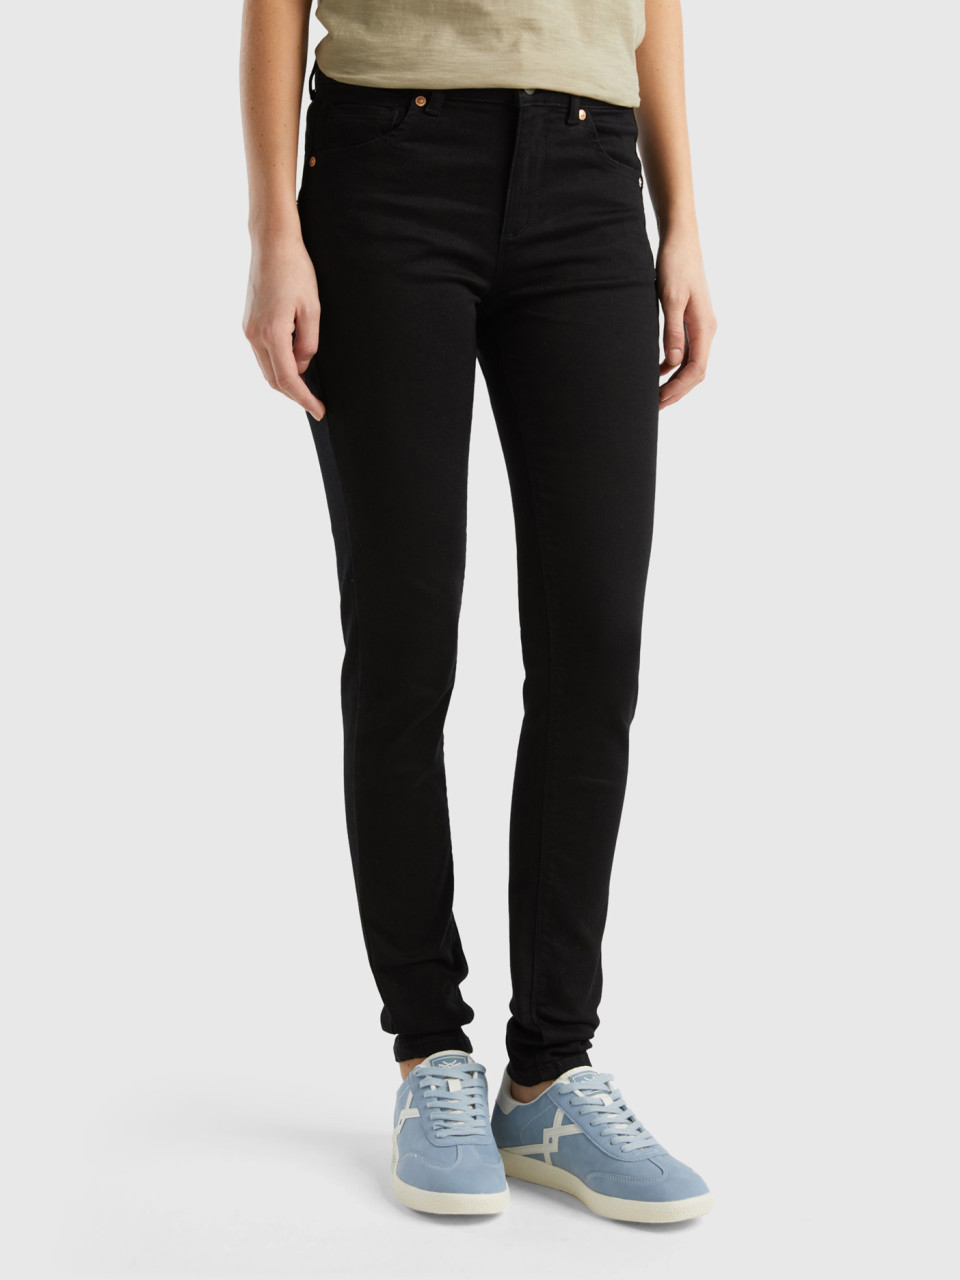 Benetton, Jeans Push Up Skinny Fit, Nero, Donna